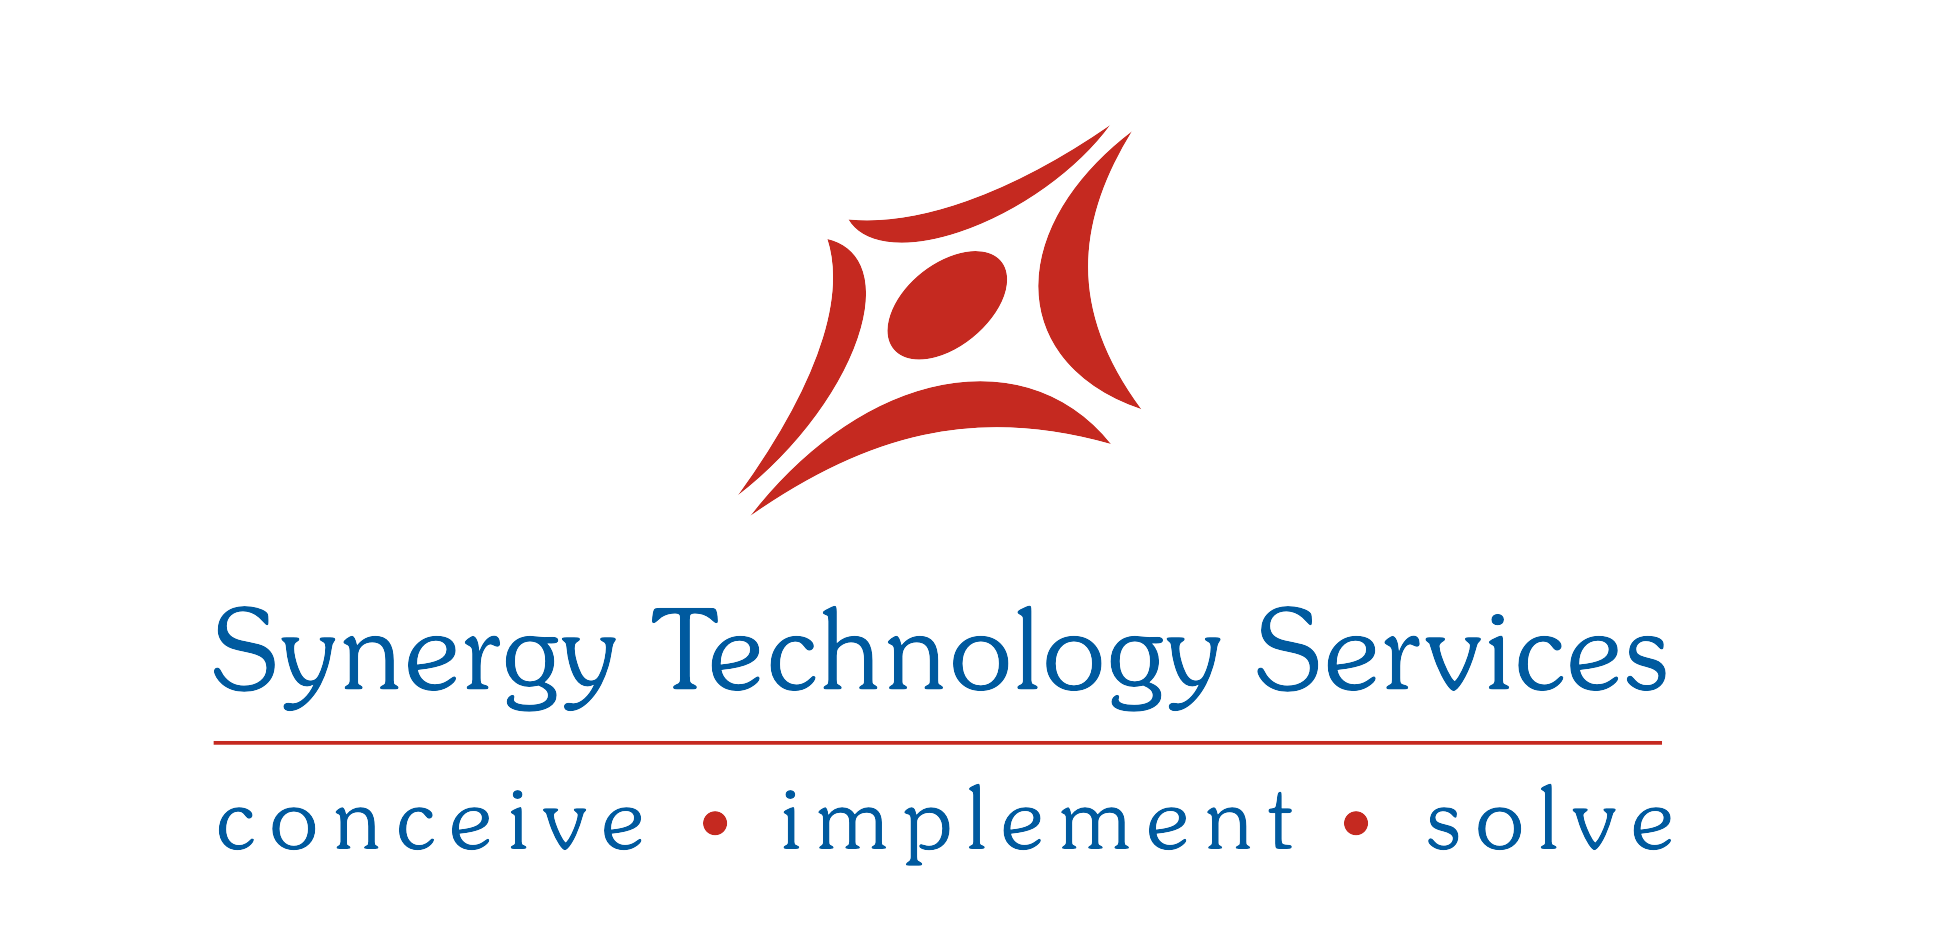 Synergy Technology Services